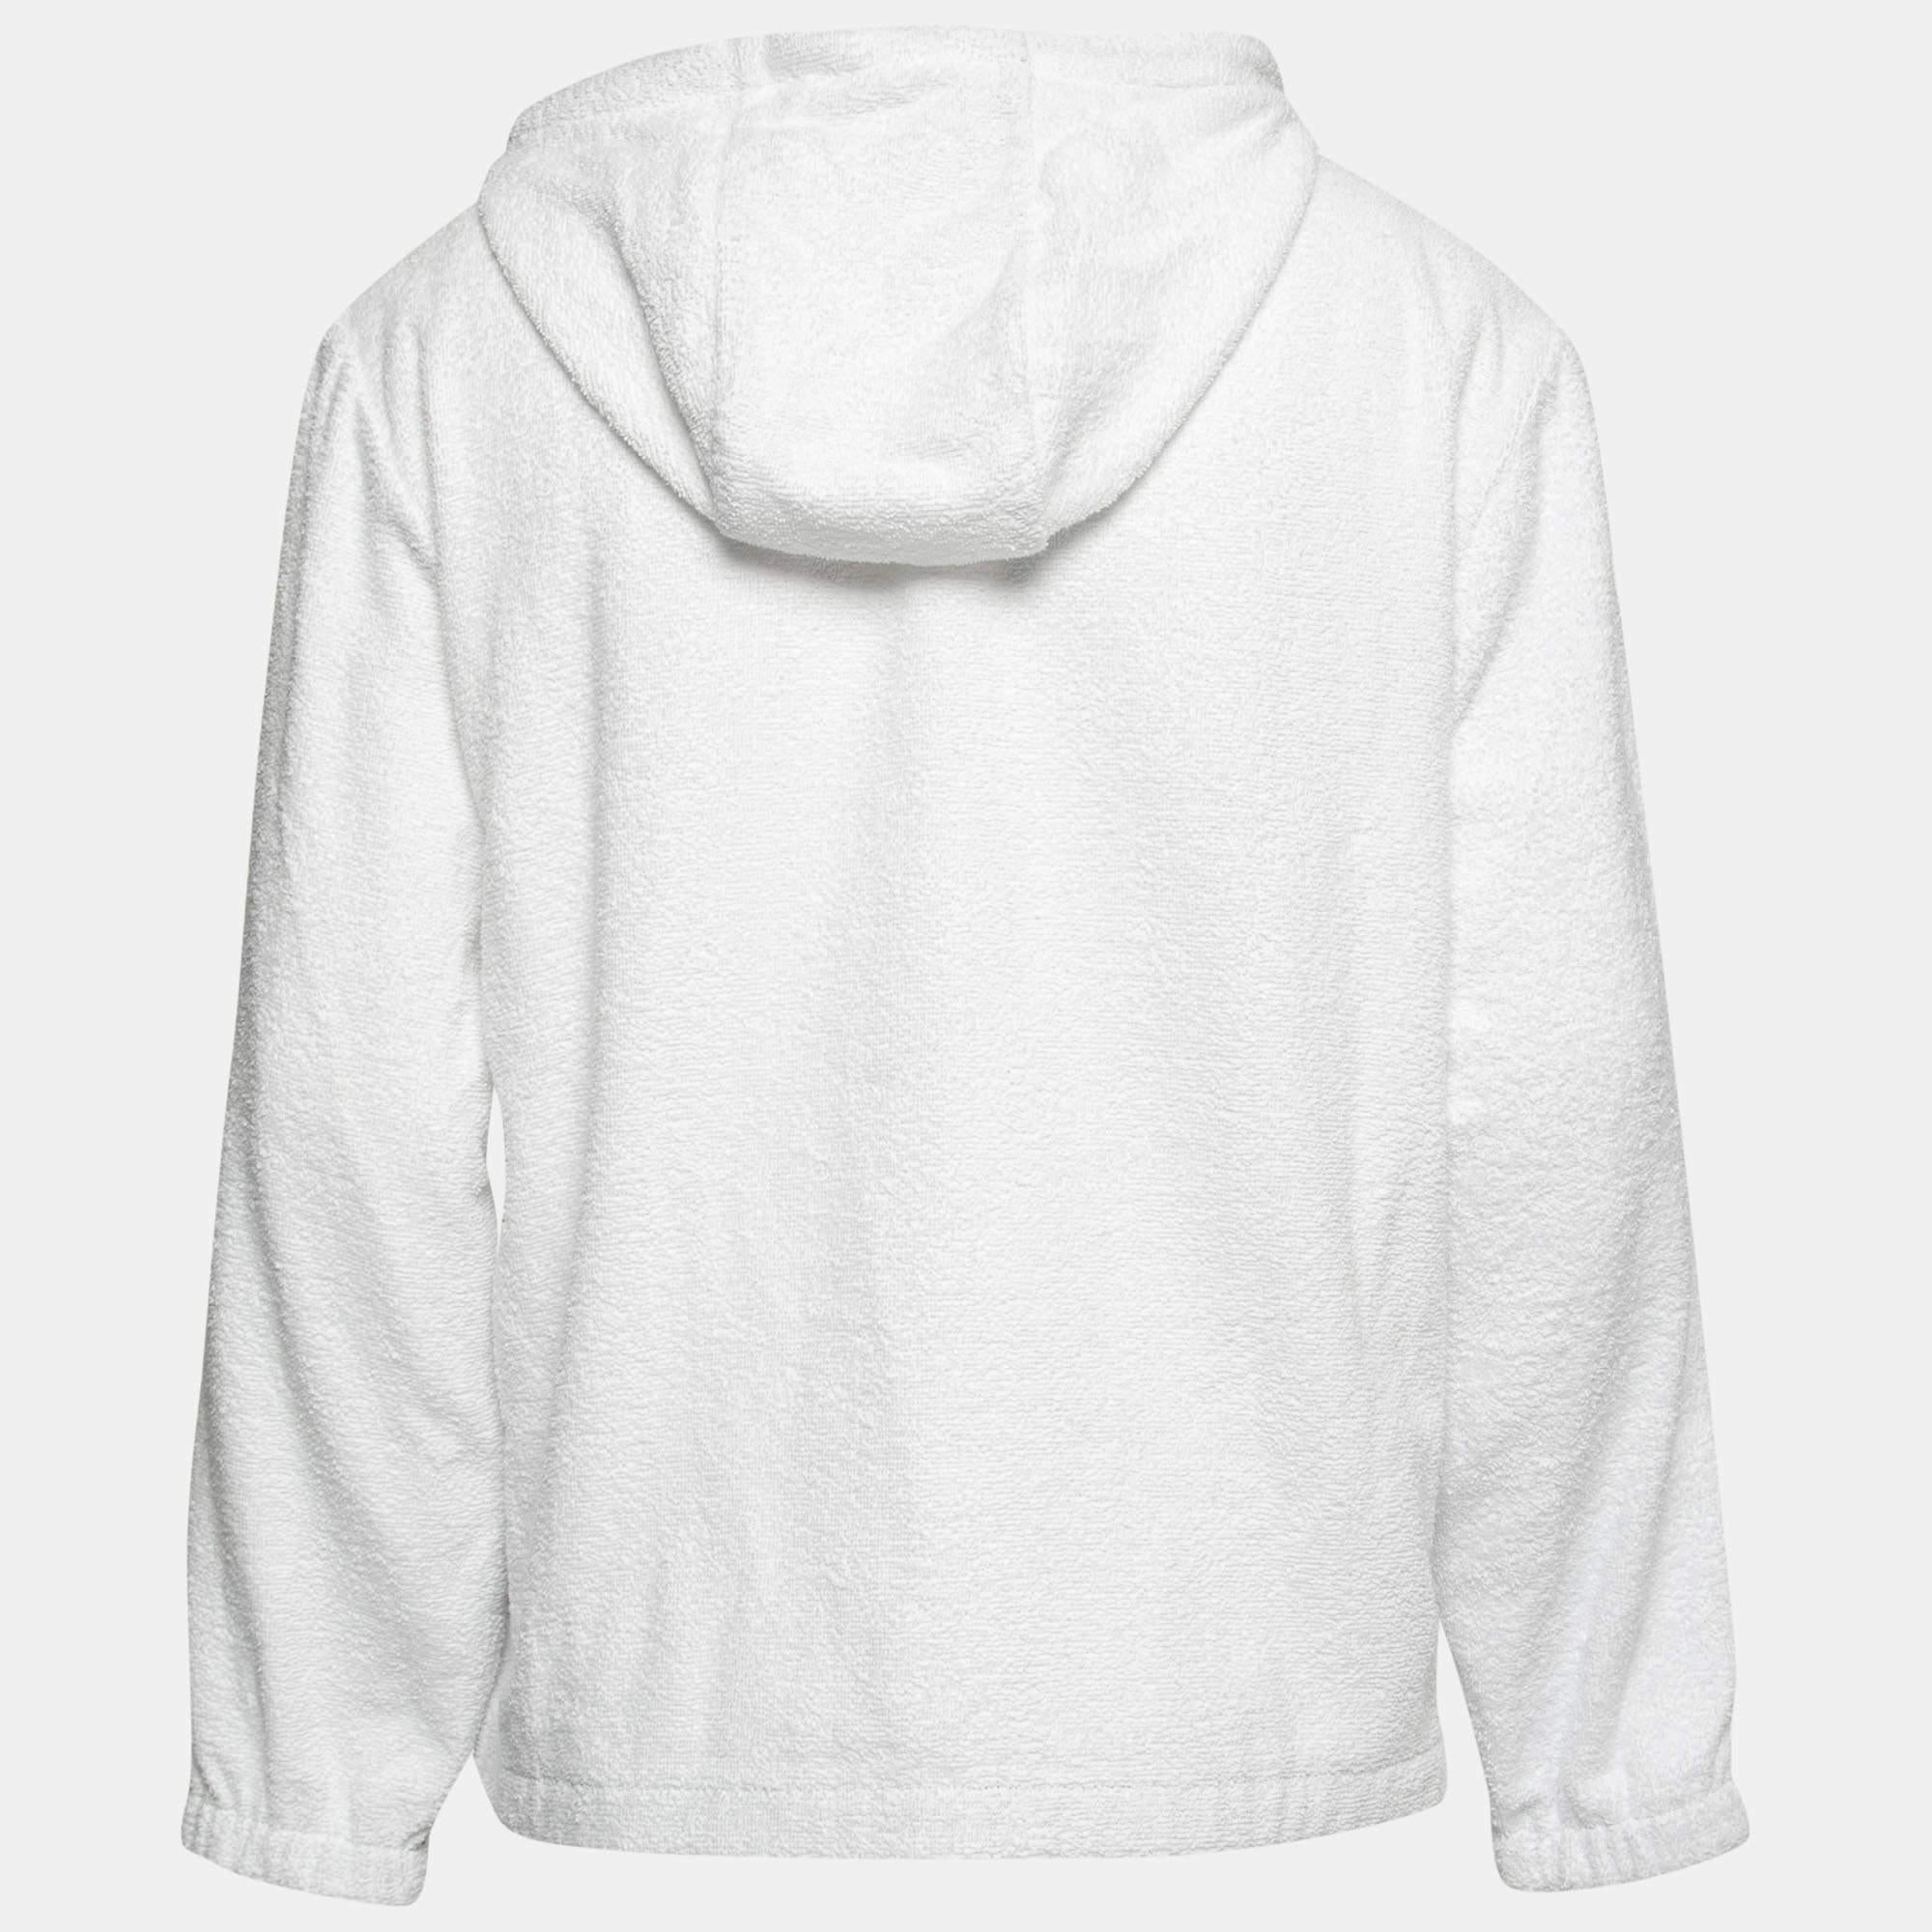 This white hoodie from Prada is simple and just the right choice for your casual style. It is made from cotton and designed with a hoodie and long sleeves. Team it with denim and high-top sneakers for a cool look.

Includes: Brand Tag
